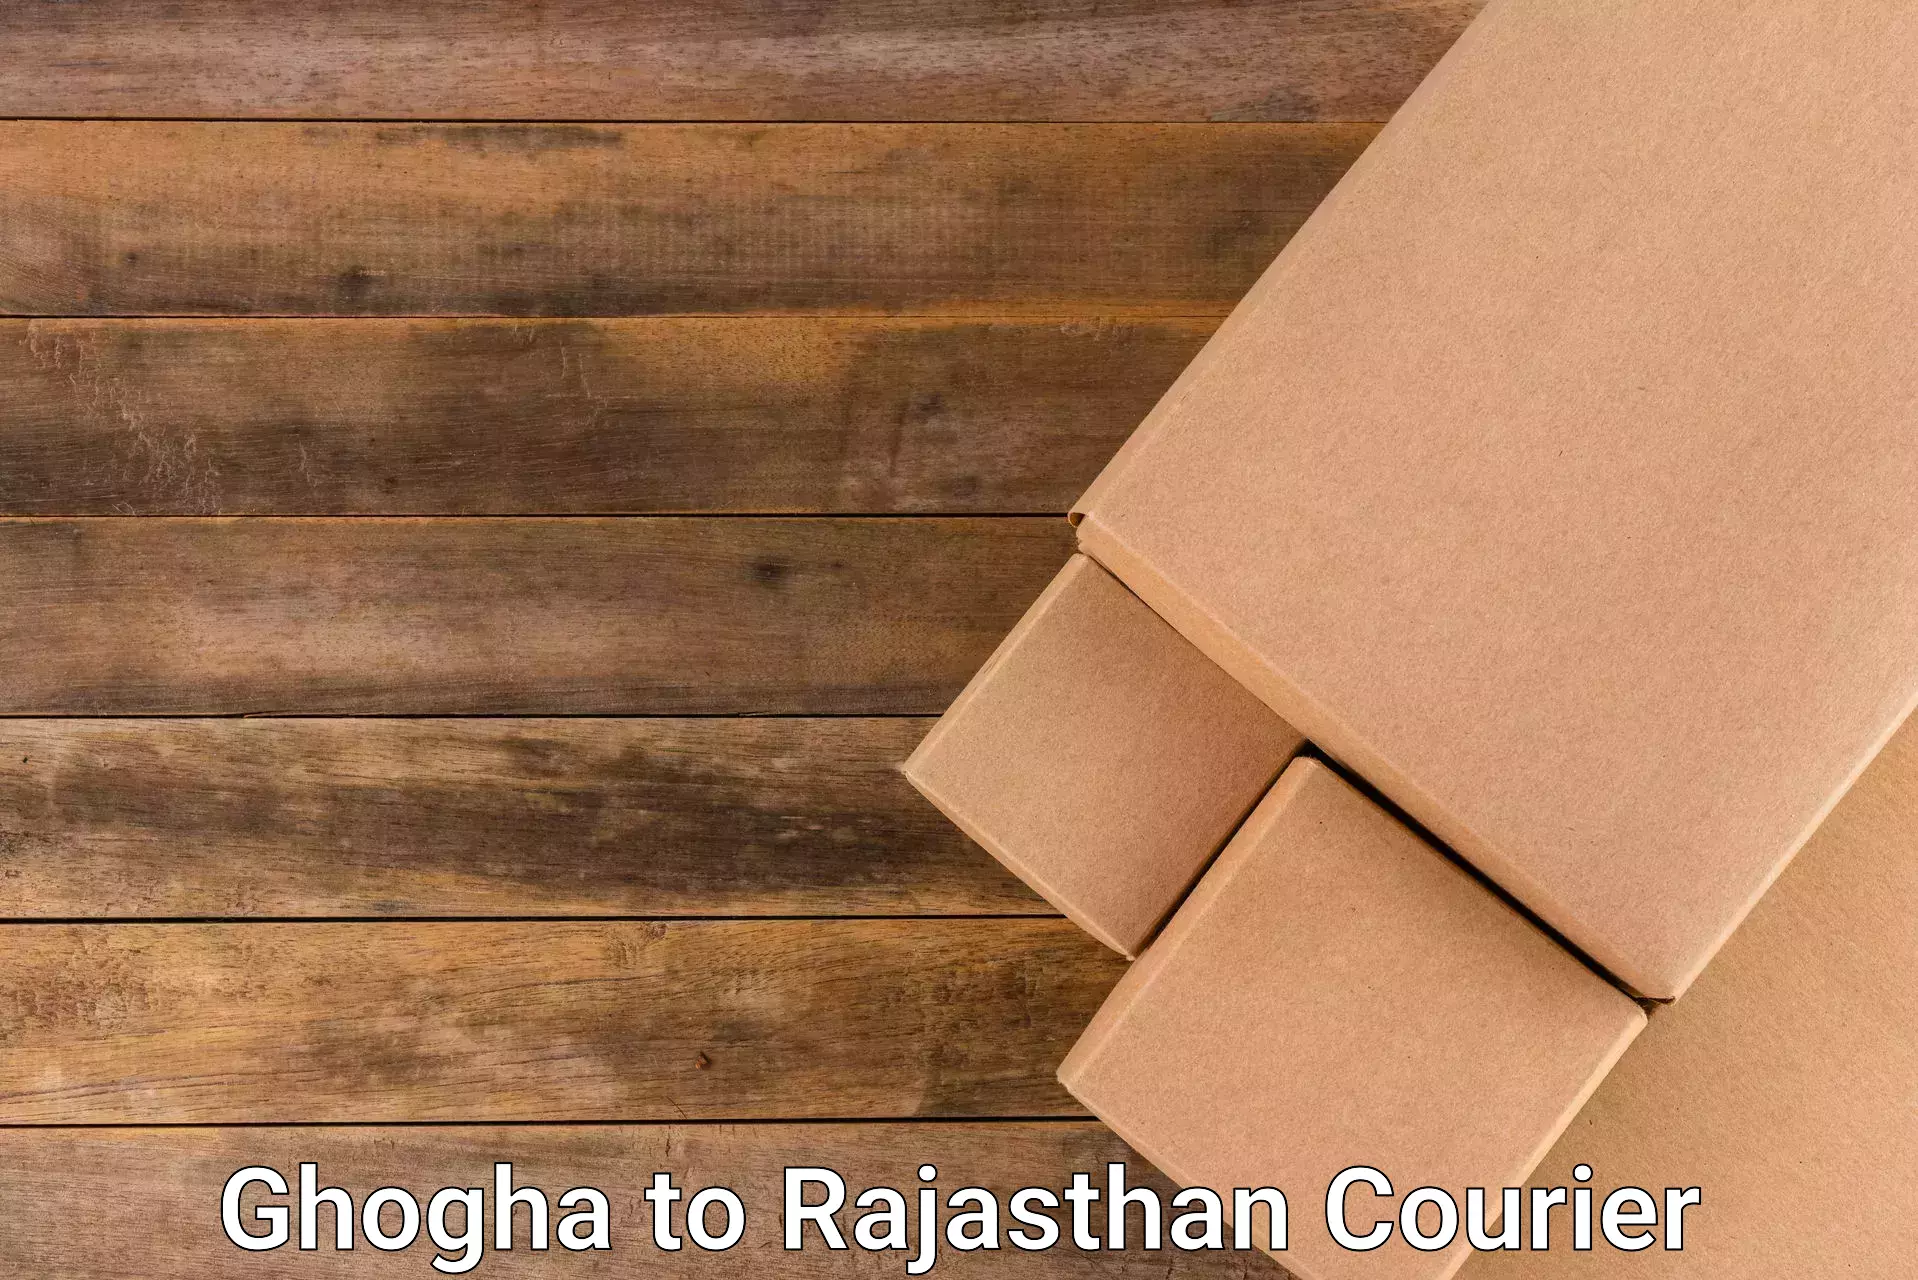 Flexible delivery schedules Ghogha to Rajgarh Rajasthan